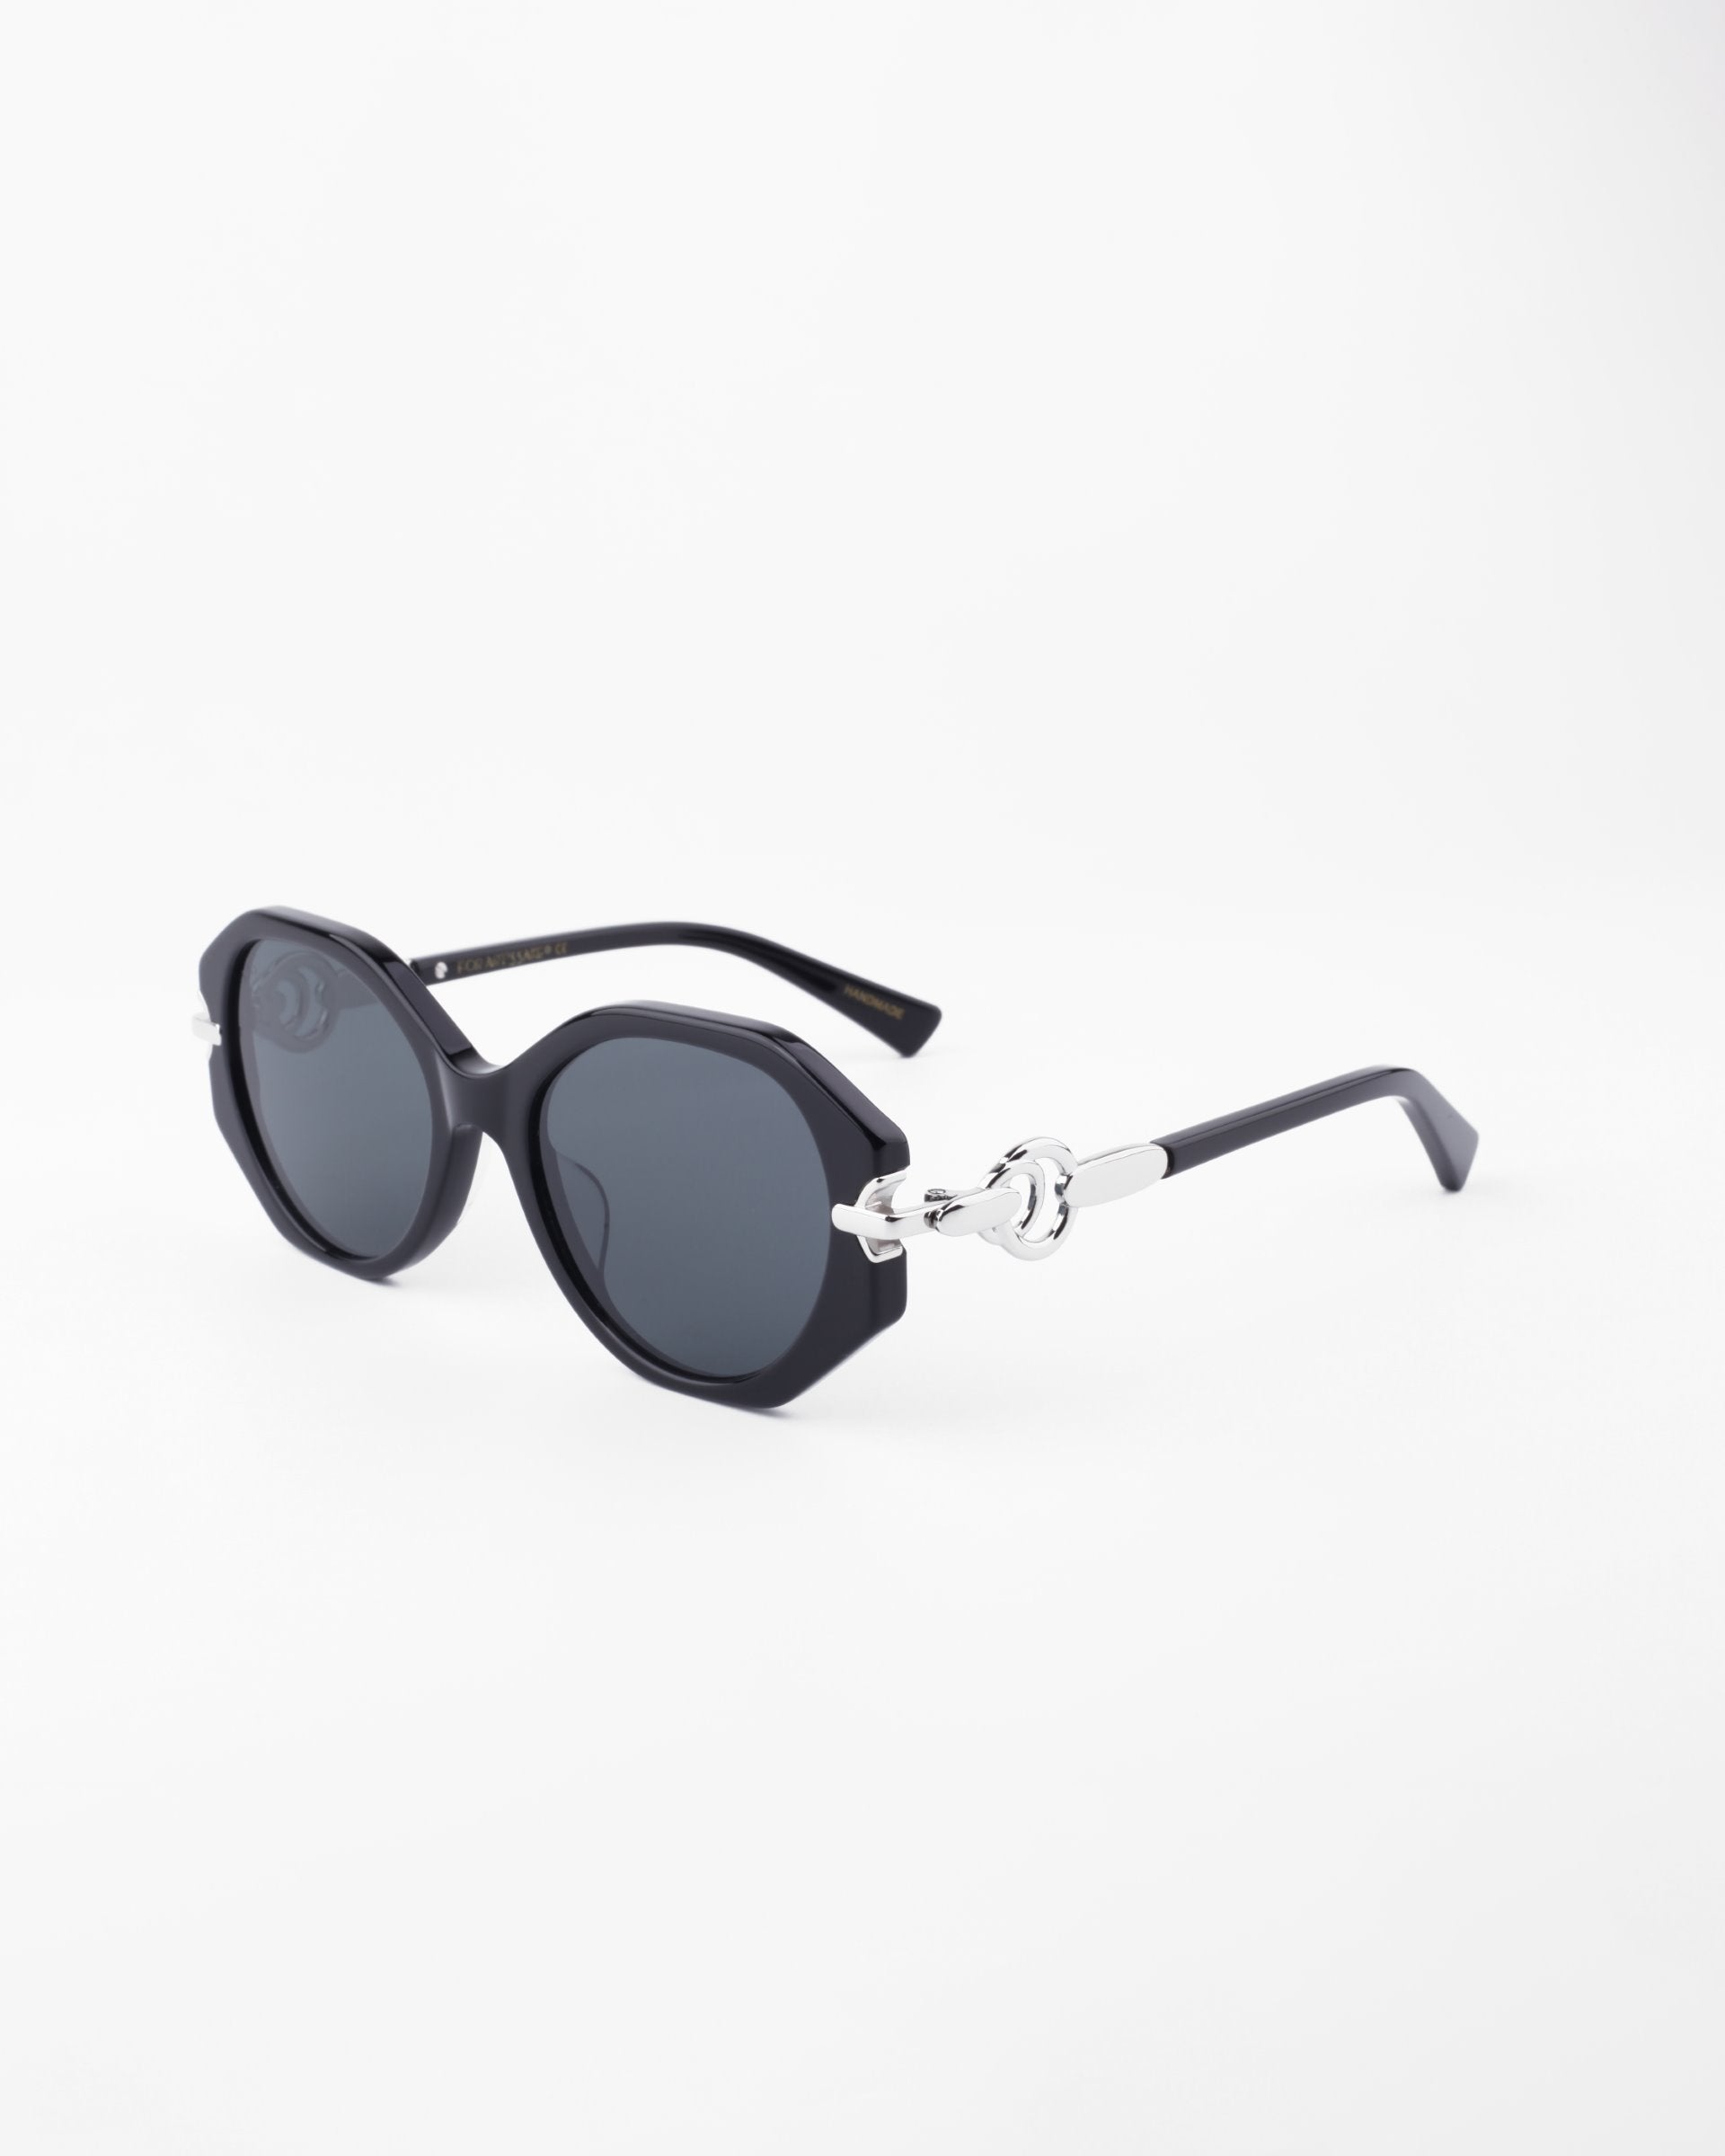 A pair of stylish black Seaside sunglasses from For Art&#39;s Sake® featuring octagonal, shatter-resistant lenses and silver accents on the hinges and arms. The design, with its modern, slightly thick rims and handmade acetate frame, exudes a fashionable and chic appearance. The background is a plain, light color.